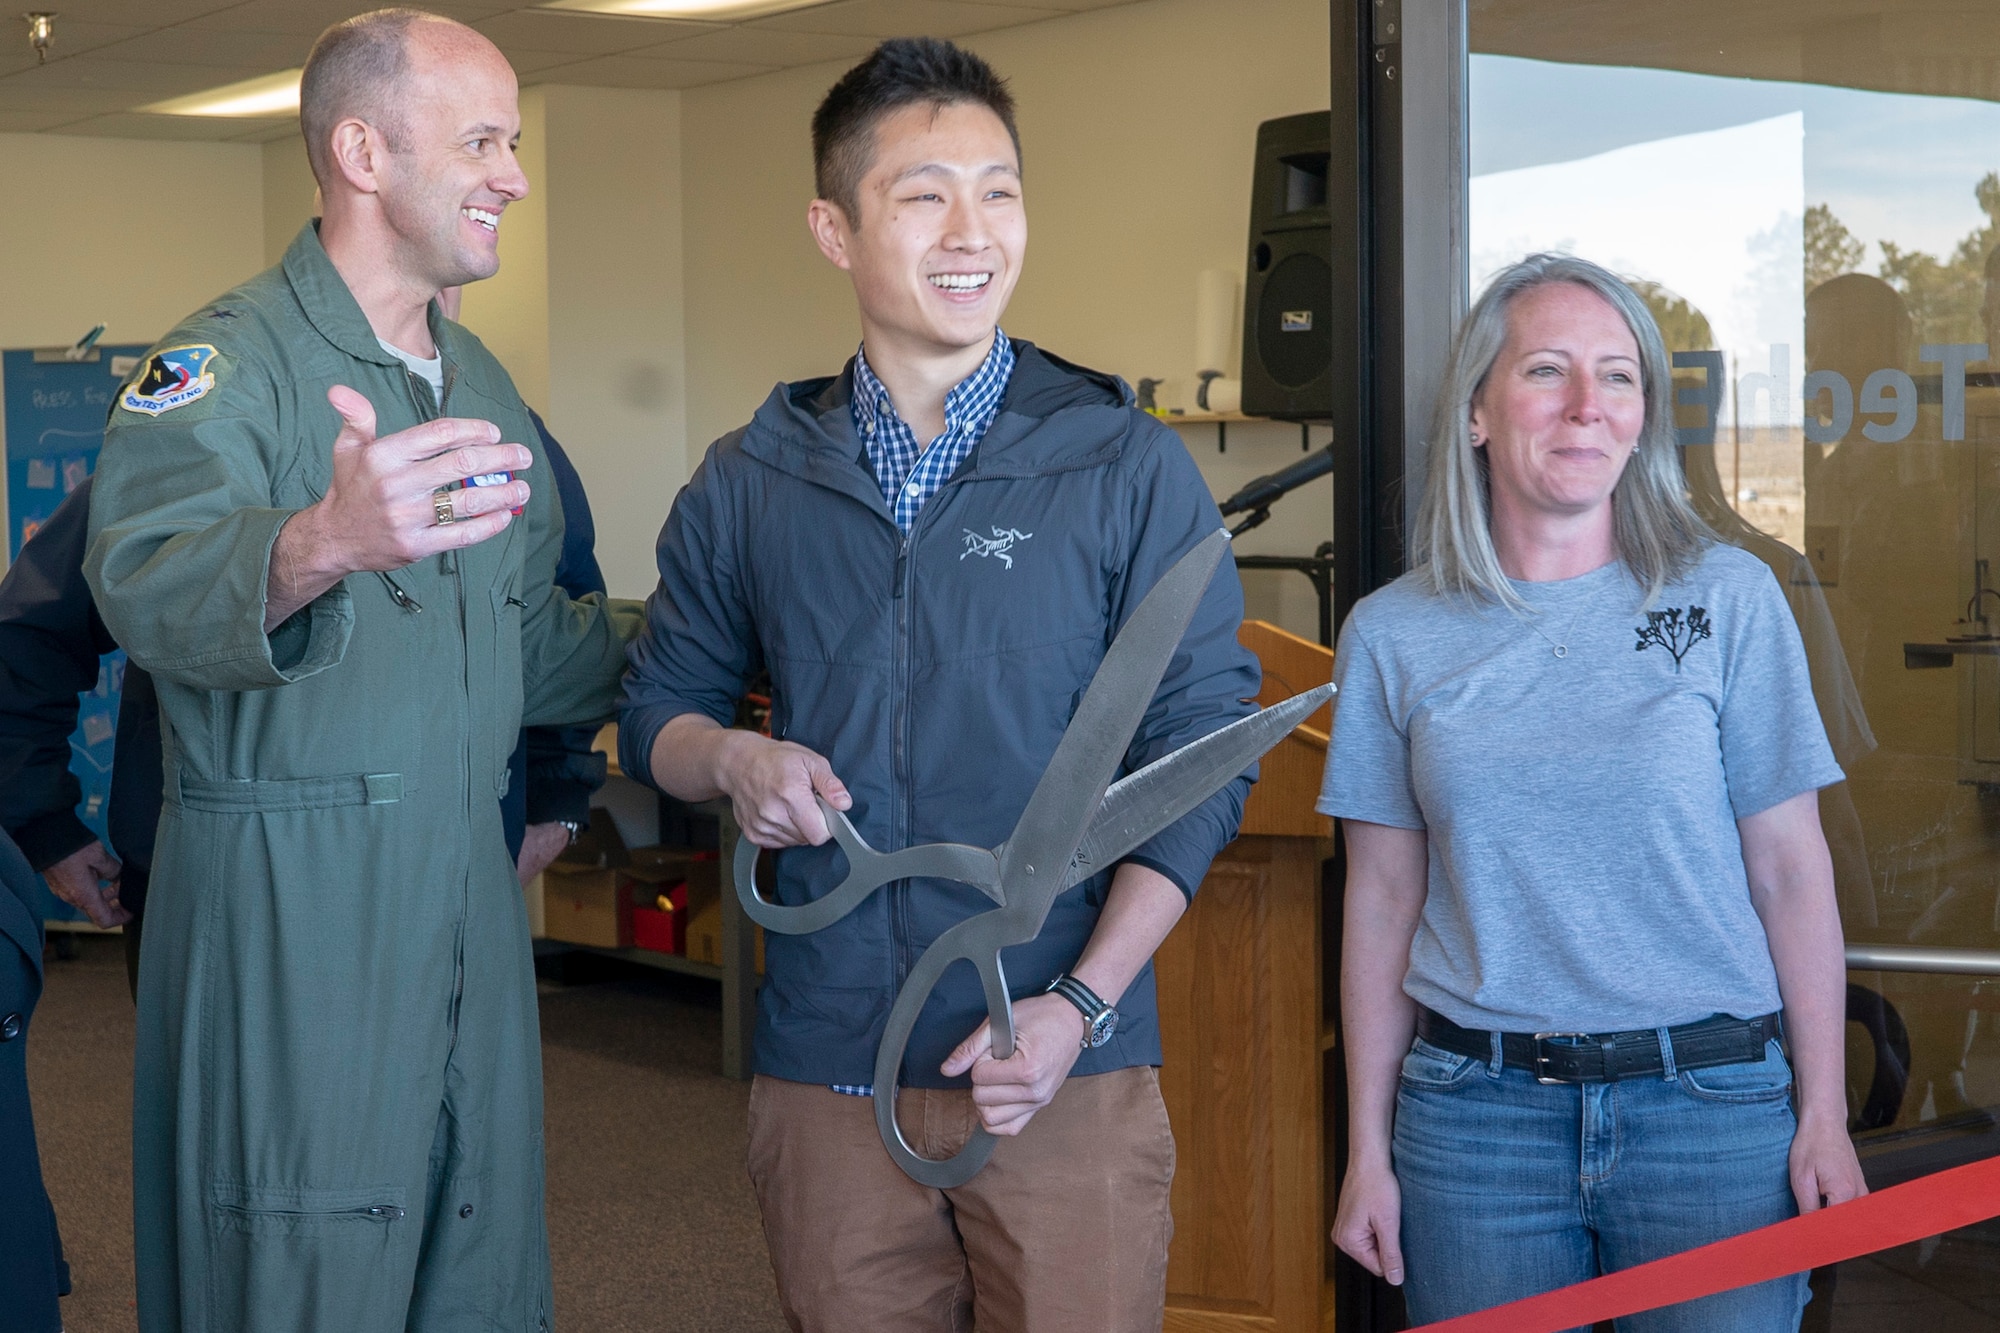 Brig. Gen. E. John Teichert, 412th Test Wing Commander; James M. Wang, program designer and Air Force ROTC student at Stanford University in Palo Alto, Calif.; and Dori Spaulding, command spouse representative for the 412th Operations Group, prepare to launch the TechEd High School Makerspace during a ribbon-cutting ceremony at Edwards Air Force Base, January 29. (Air Force photo by Grady T. Fontana/Released)